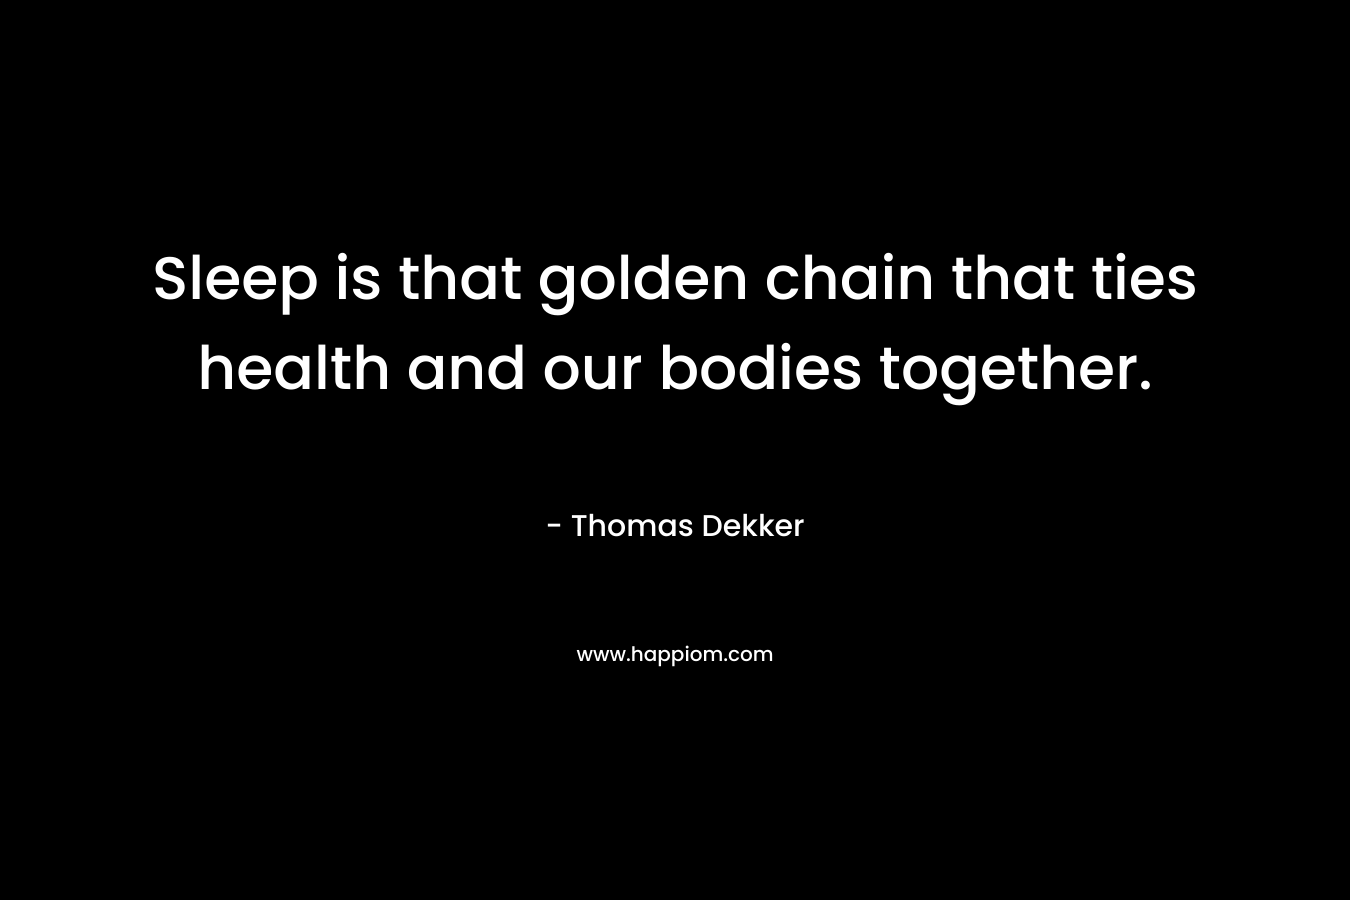 Sleep is that golden chain that ties health and our bodies together. – Thomas Dekker